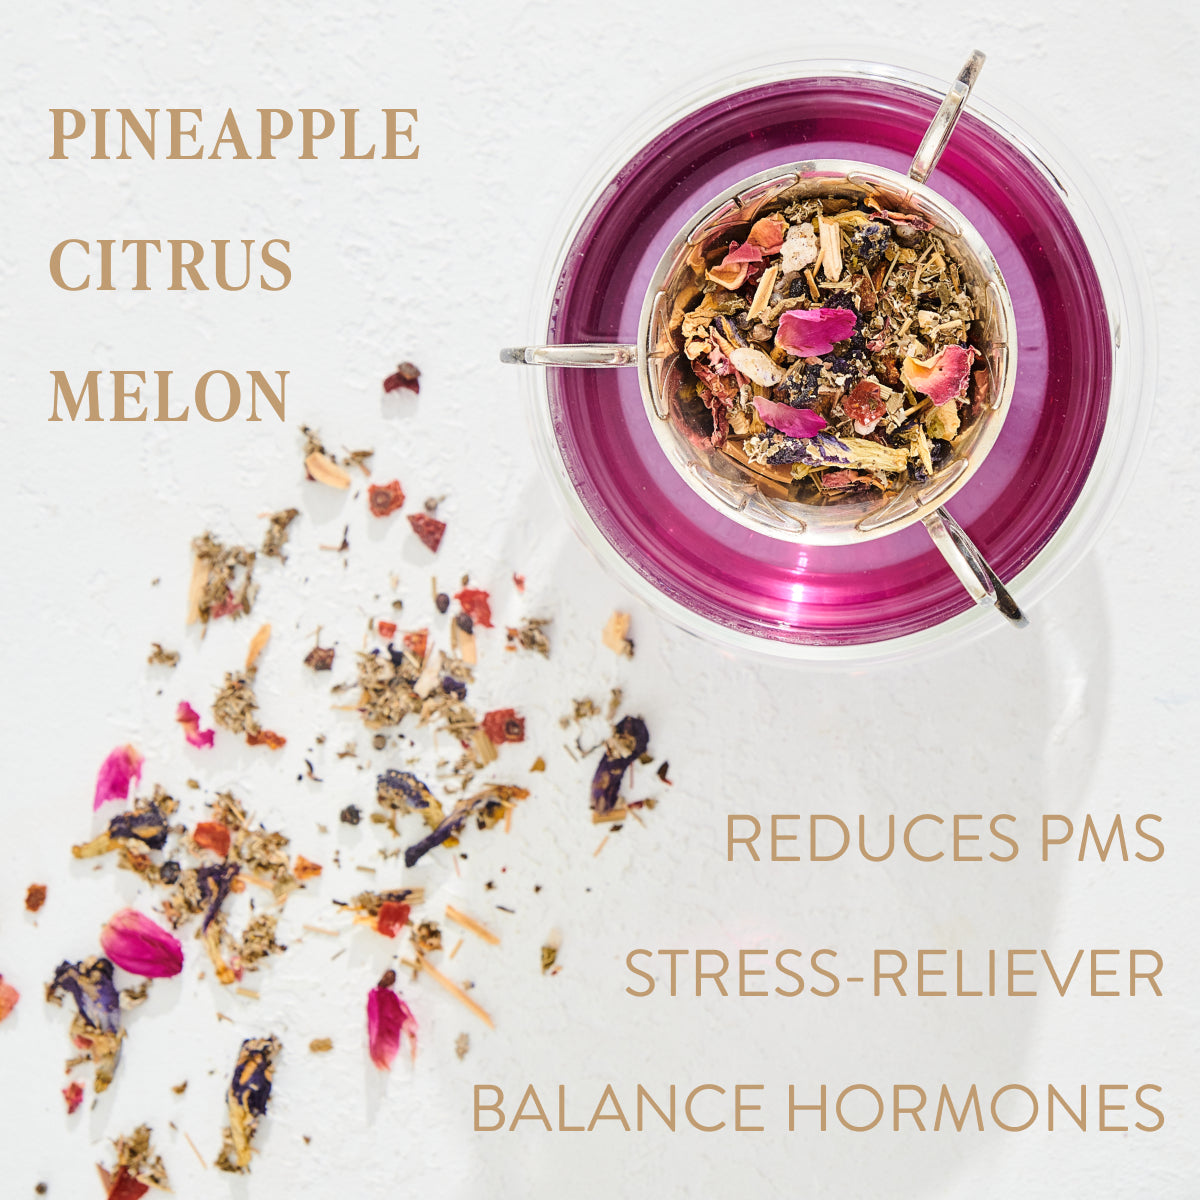 A glass cup filled with herbal tea sits on a white surface. Surrounding the cup are scattered tea leaves and petals. Text on the image highlights Magic Hour&#39;s Queen of Wellness: Women&#39;s Hormone Balancing Tea for PMS, Healthy Cycles &amp; Menopause flavors: pineapple, citrus, melon, and its benefits: reduces PMS, stress-reliever, balances hormones. Enjoy this organic loose-leaf tea for a moment of tranquility.